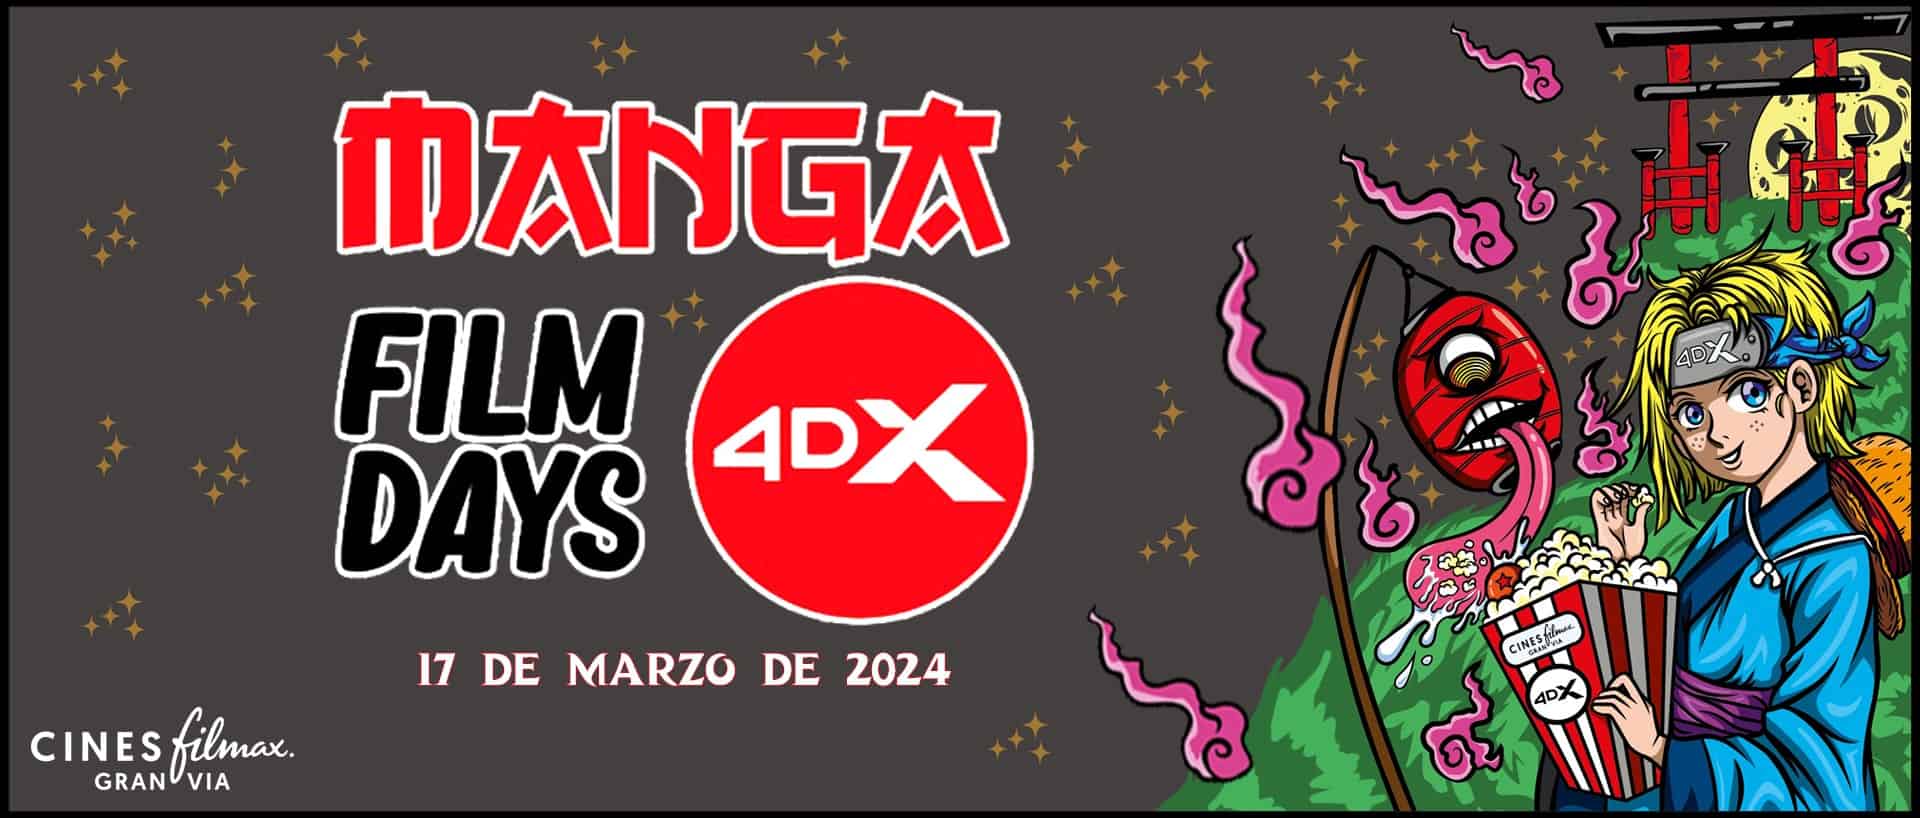 Manga Film Days 4DX Barcelona: dive into the world of anime like never before